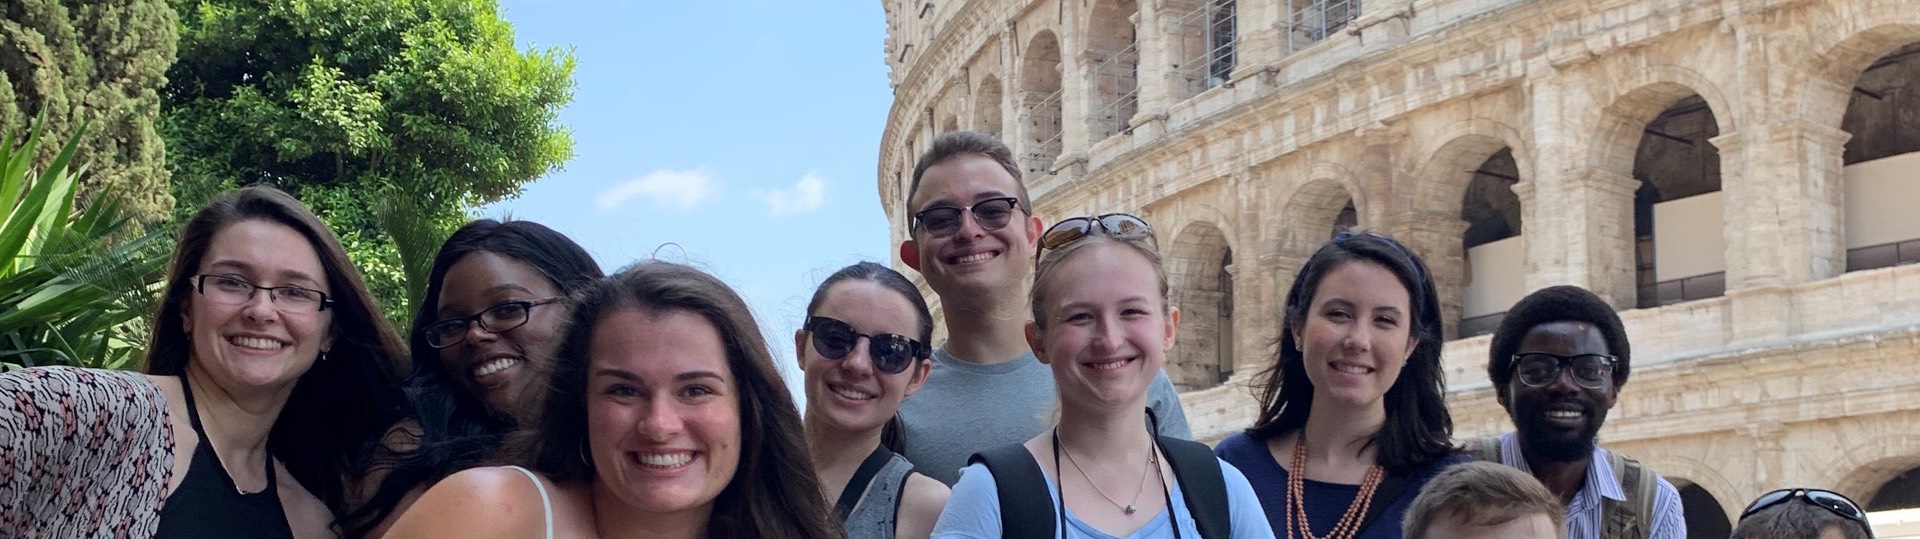 Group of Harford students in  front of Coliseum in Rome, Italy